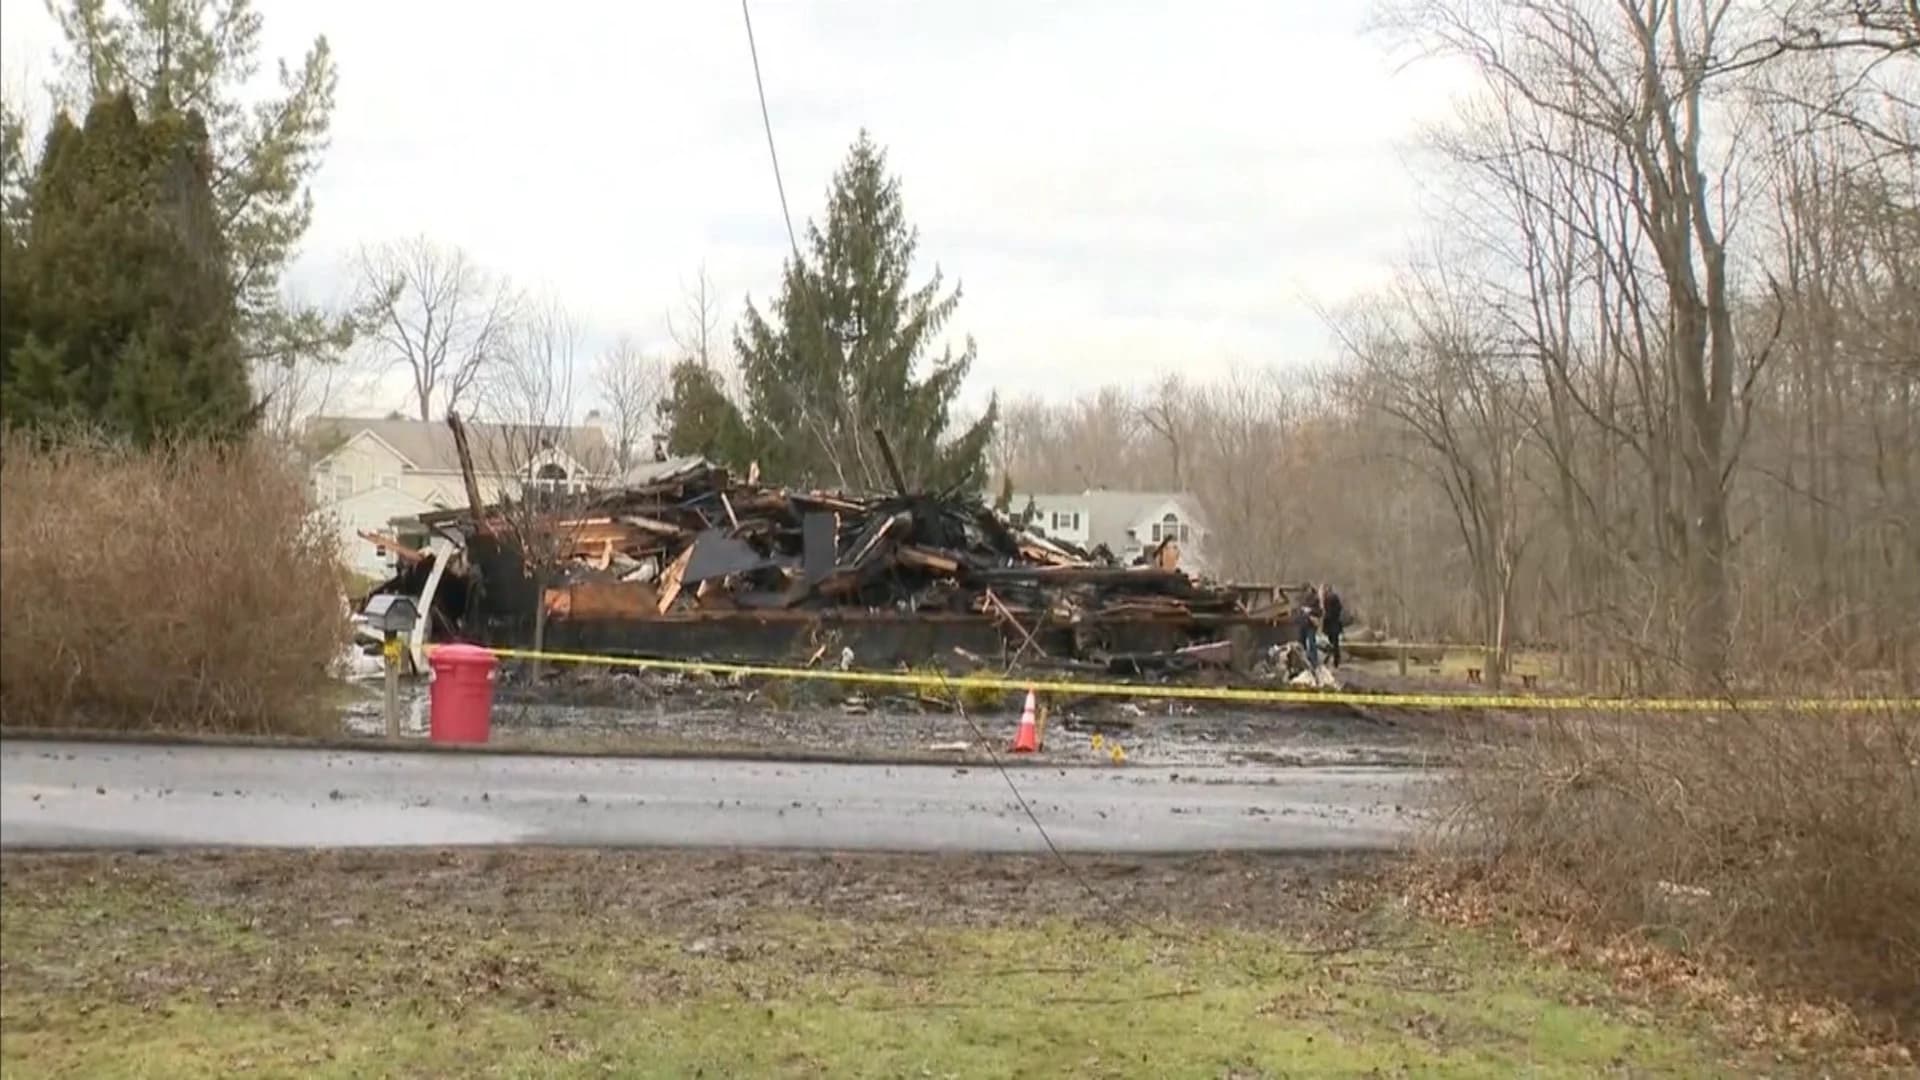 Fire destroys family's newly renovated home in Old Tappan